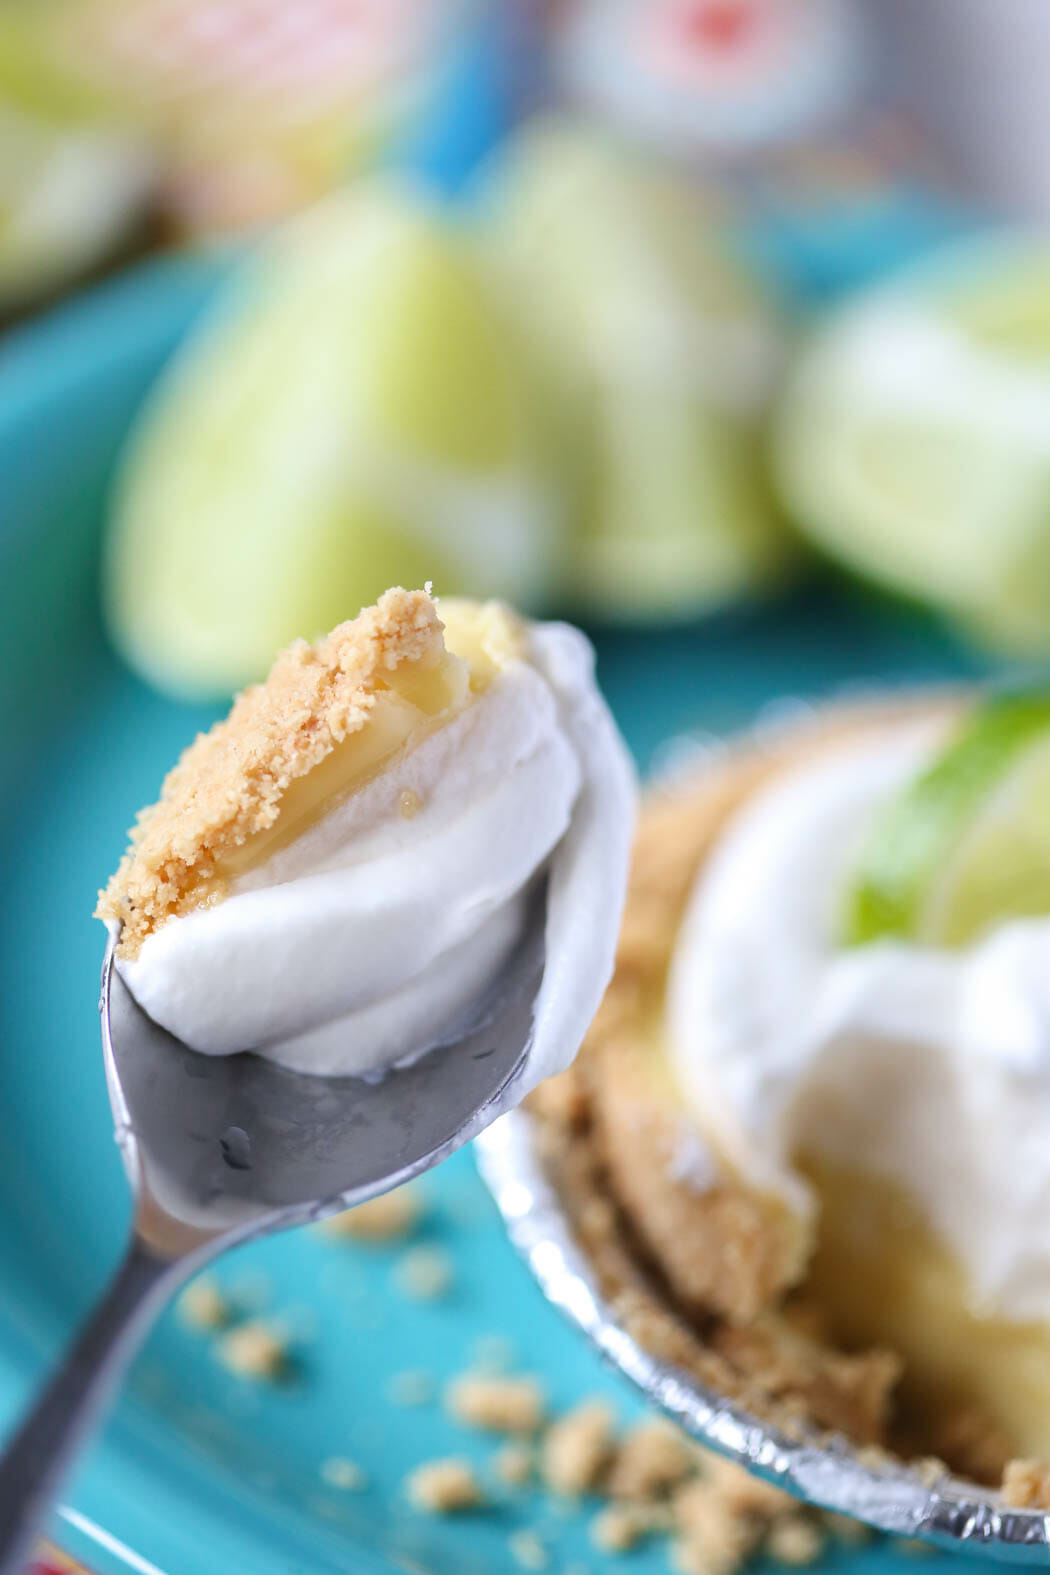 Bite of Key Lime Pie from Our Best Bites